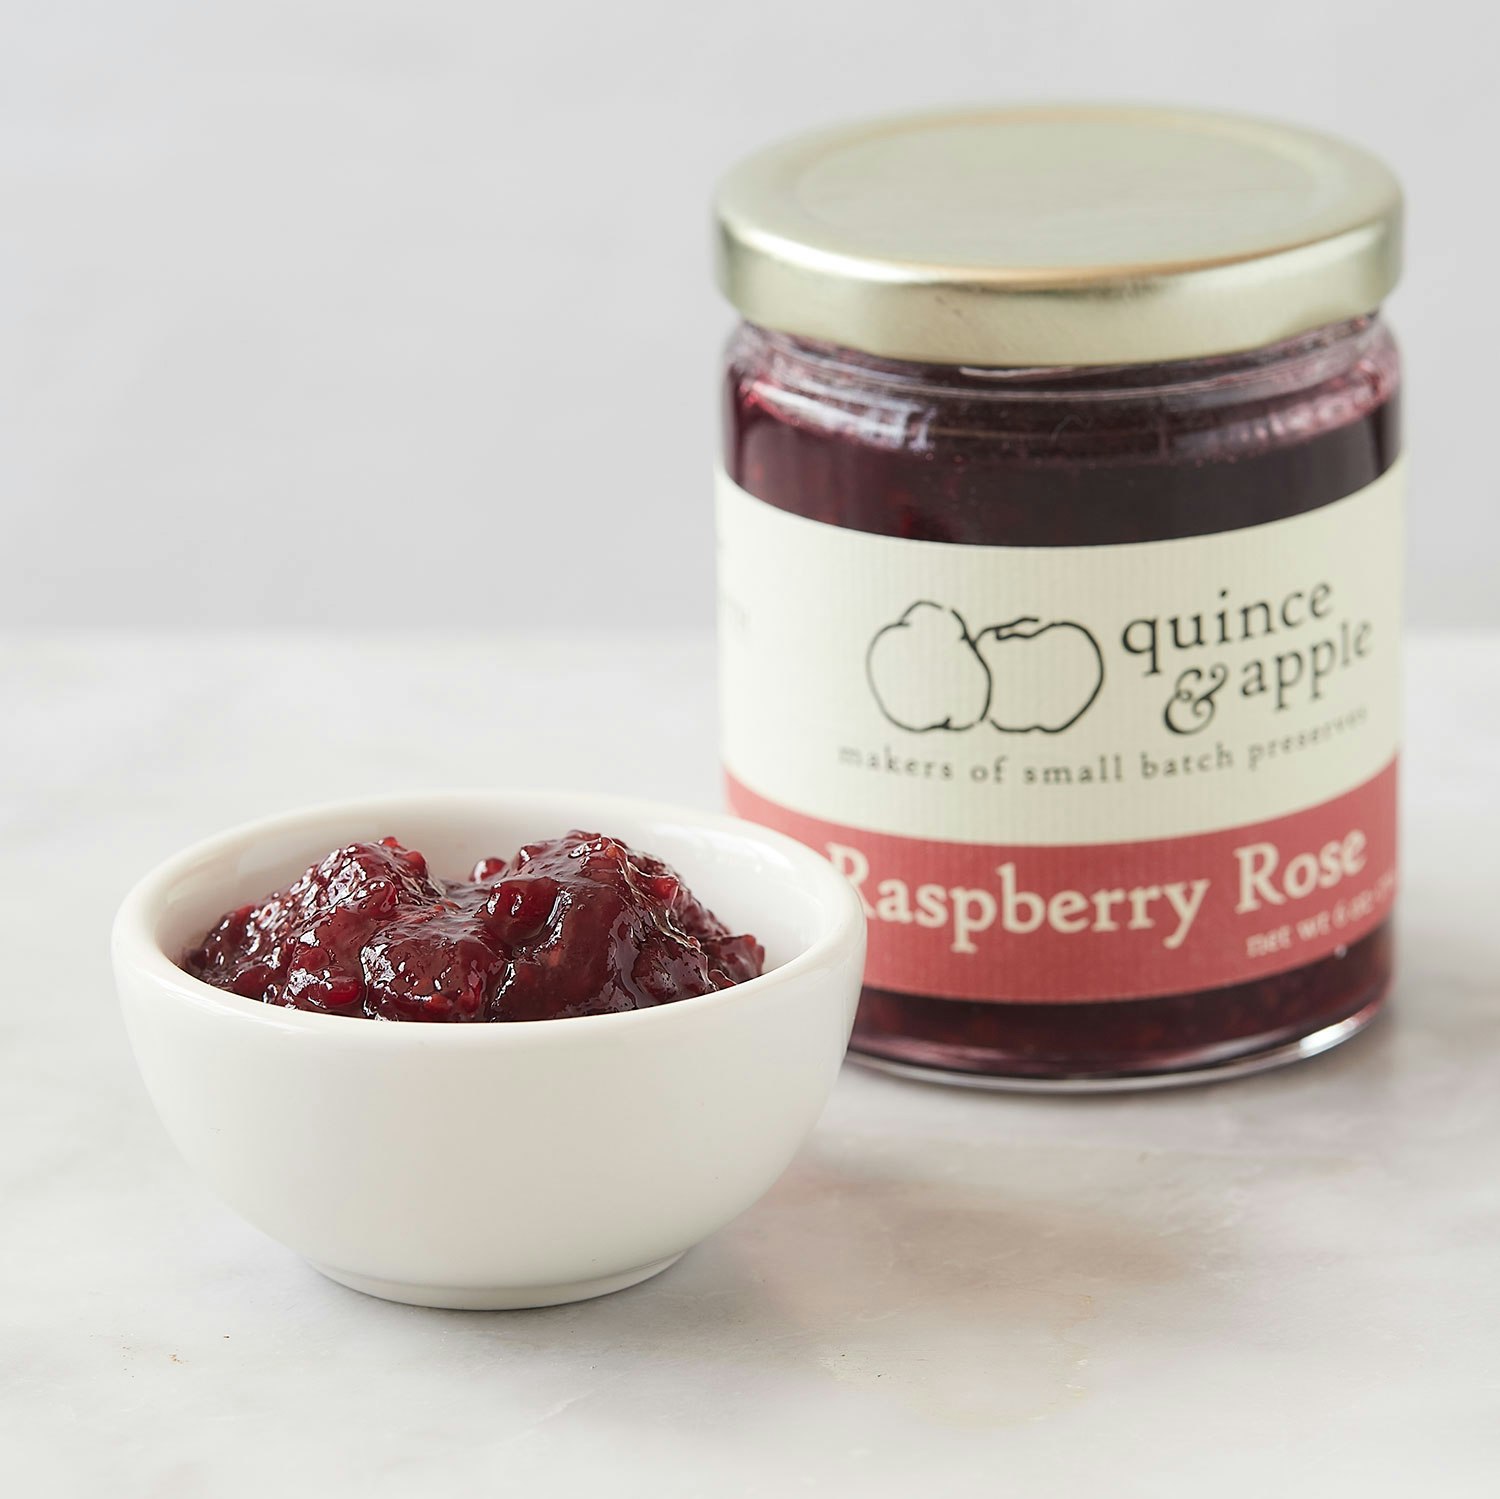 Quince & Apple Company Raspberry Rose Preserves